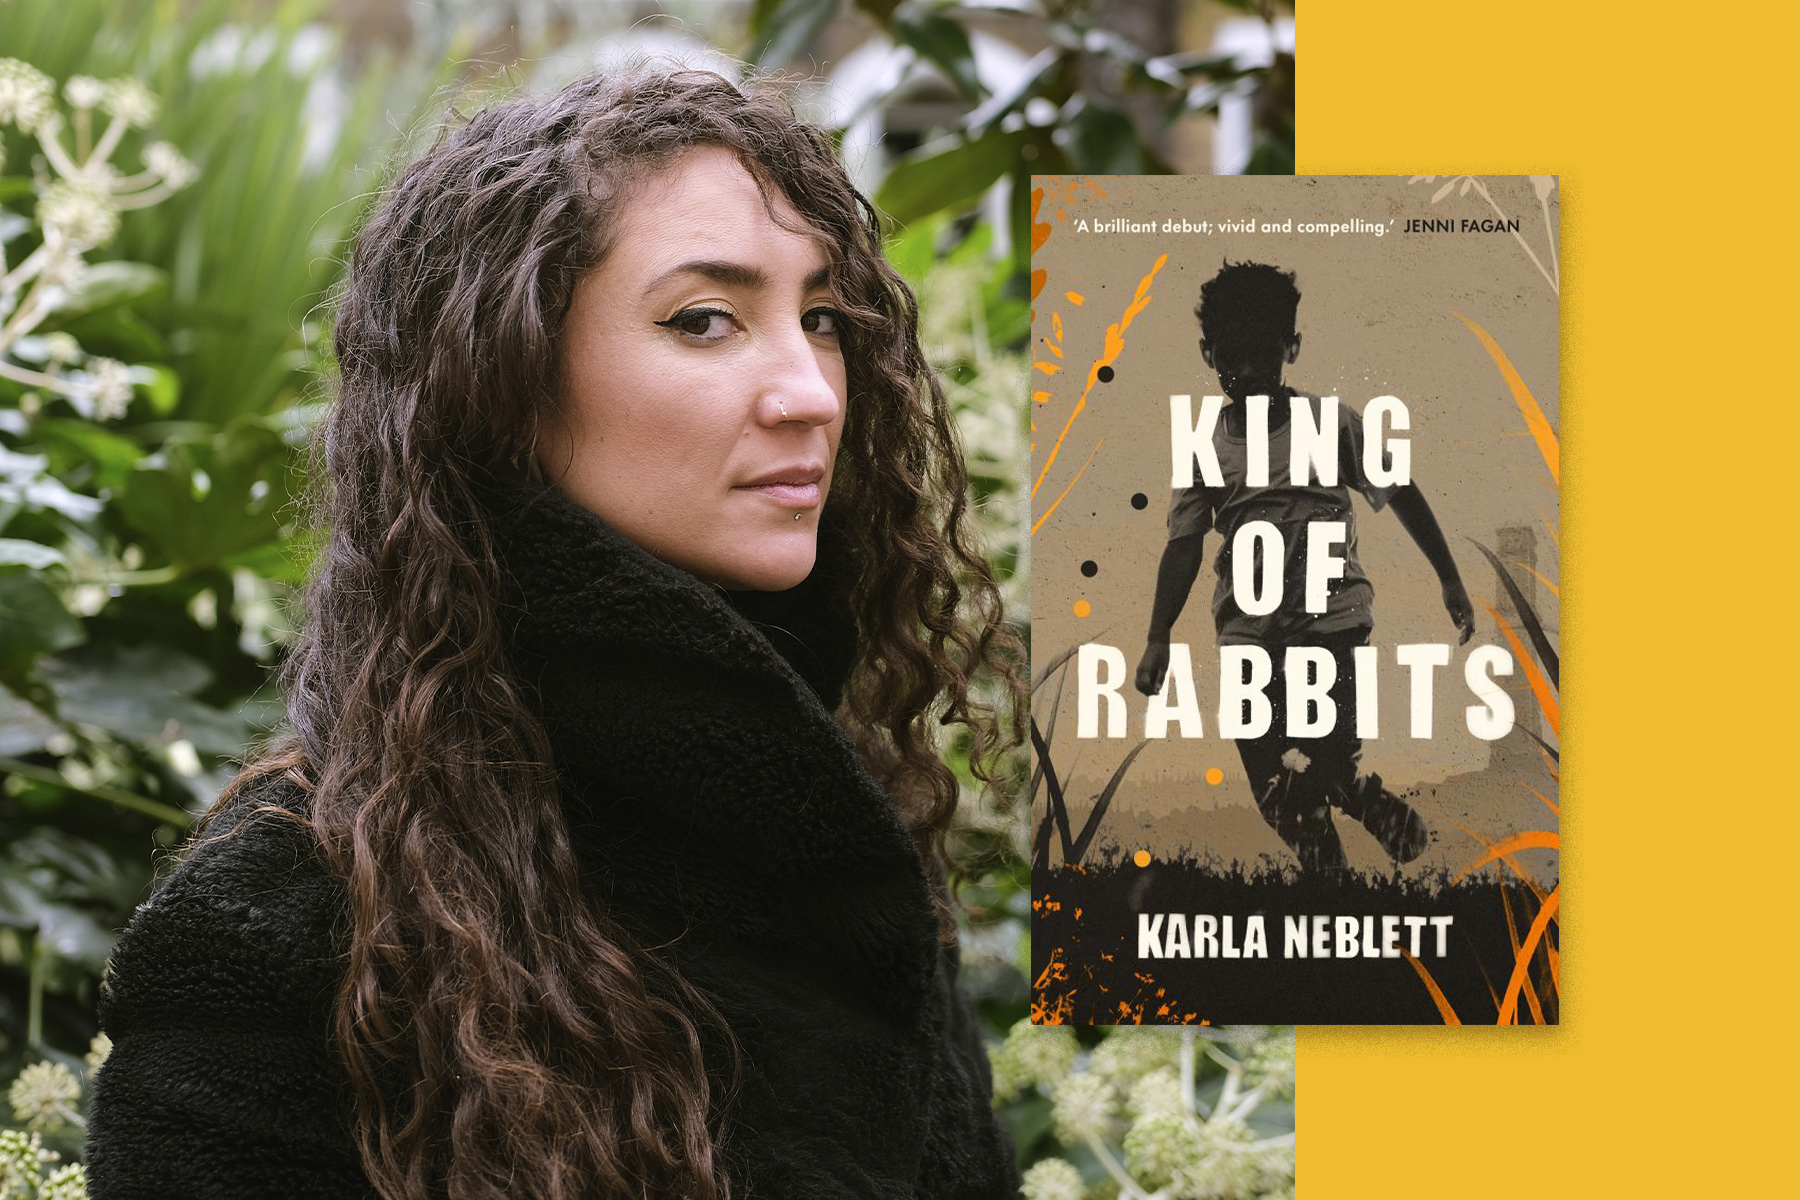 A photograph of Karla Neblett, collaged next to the cover of her book, King of Rabbits